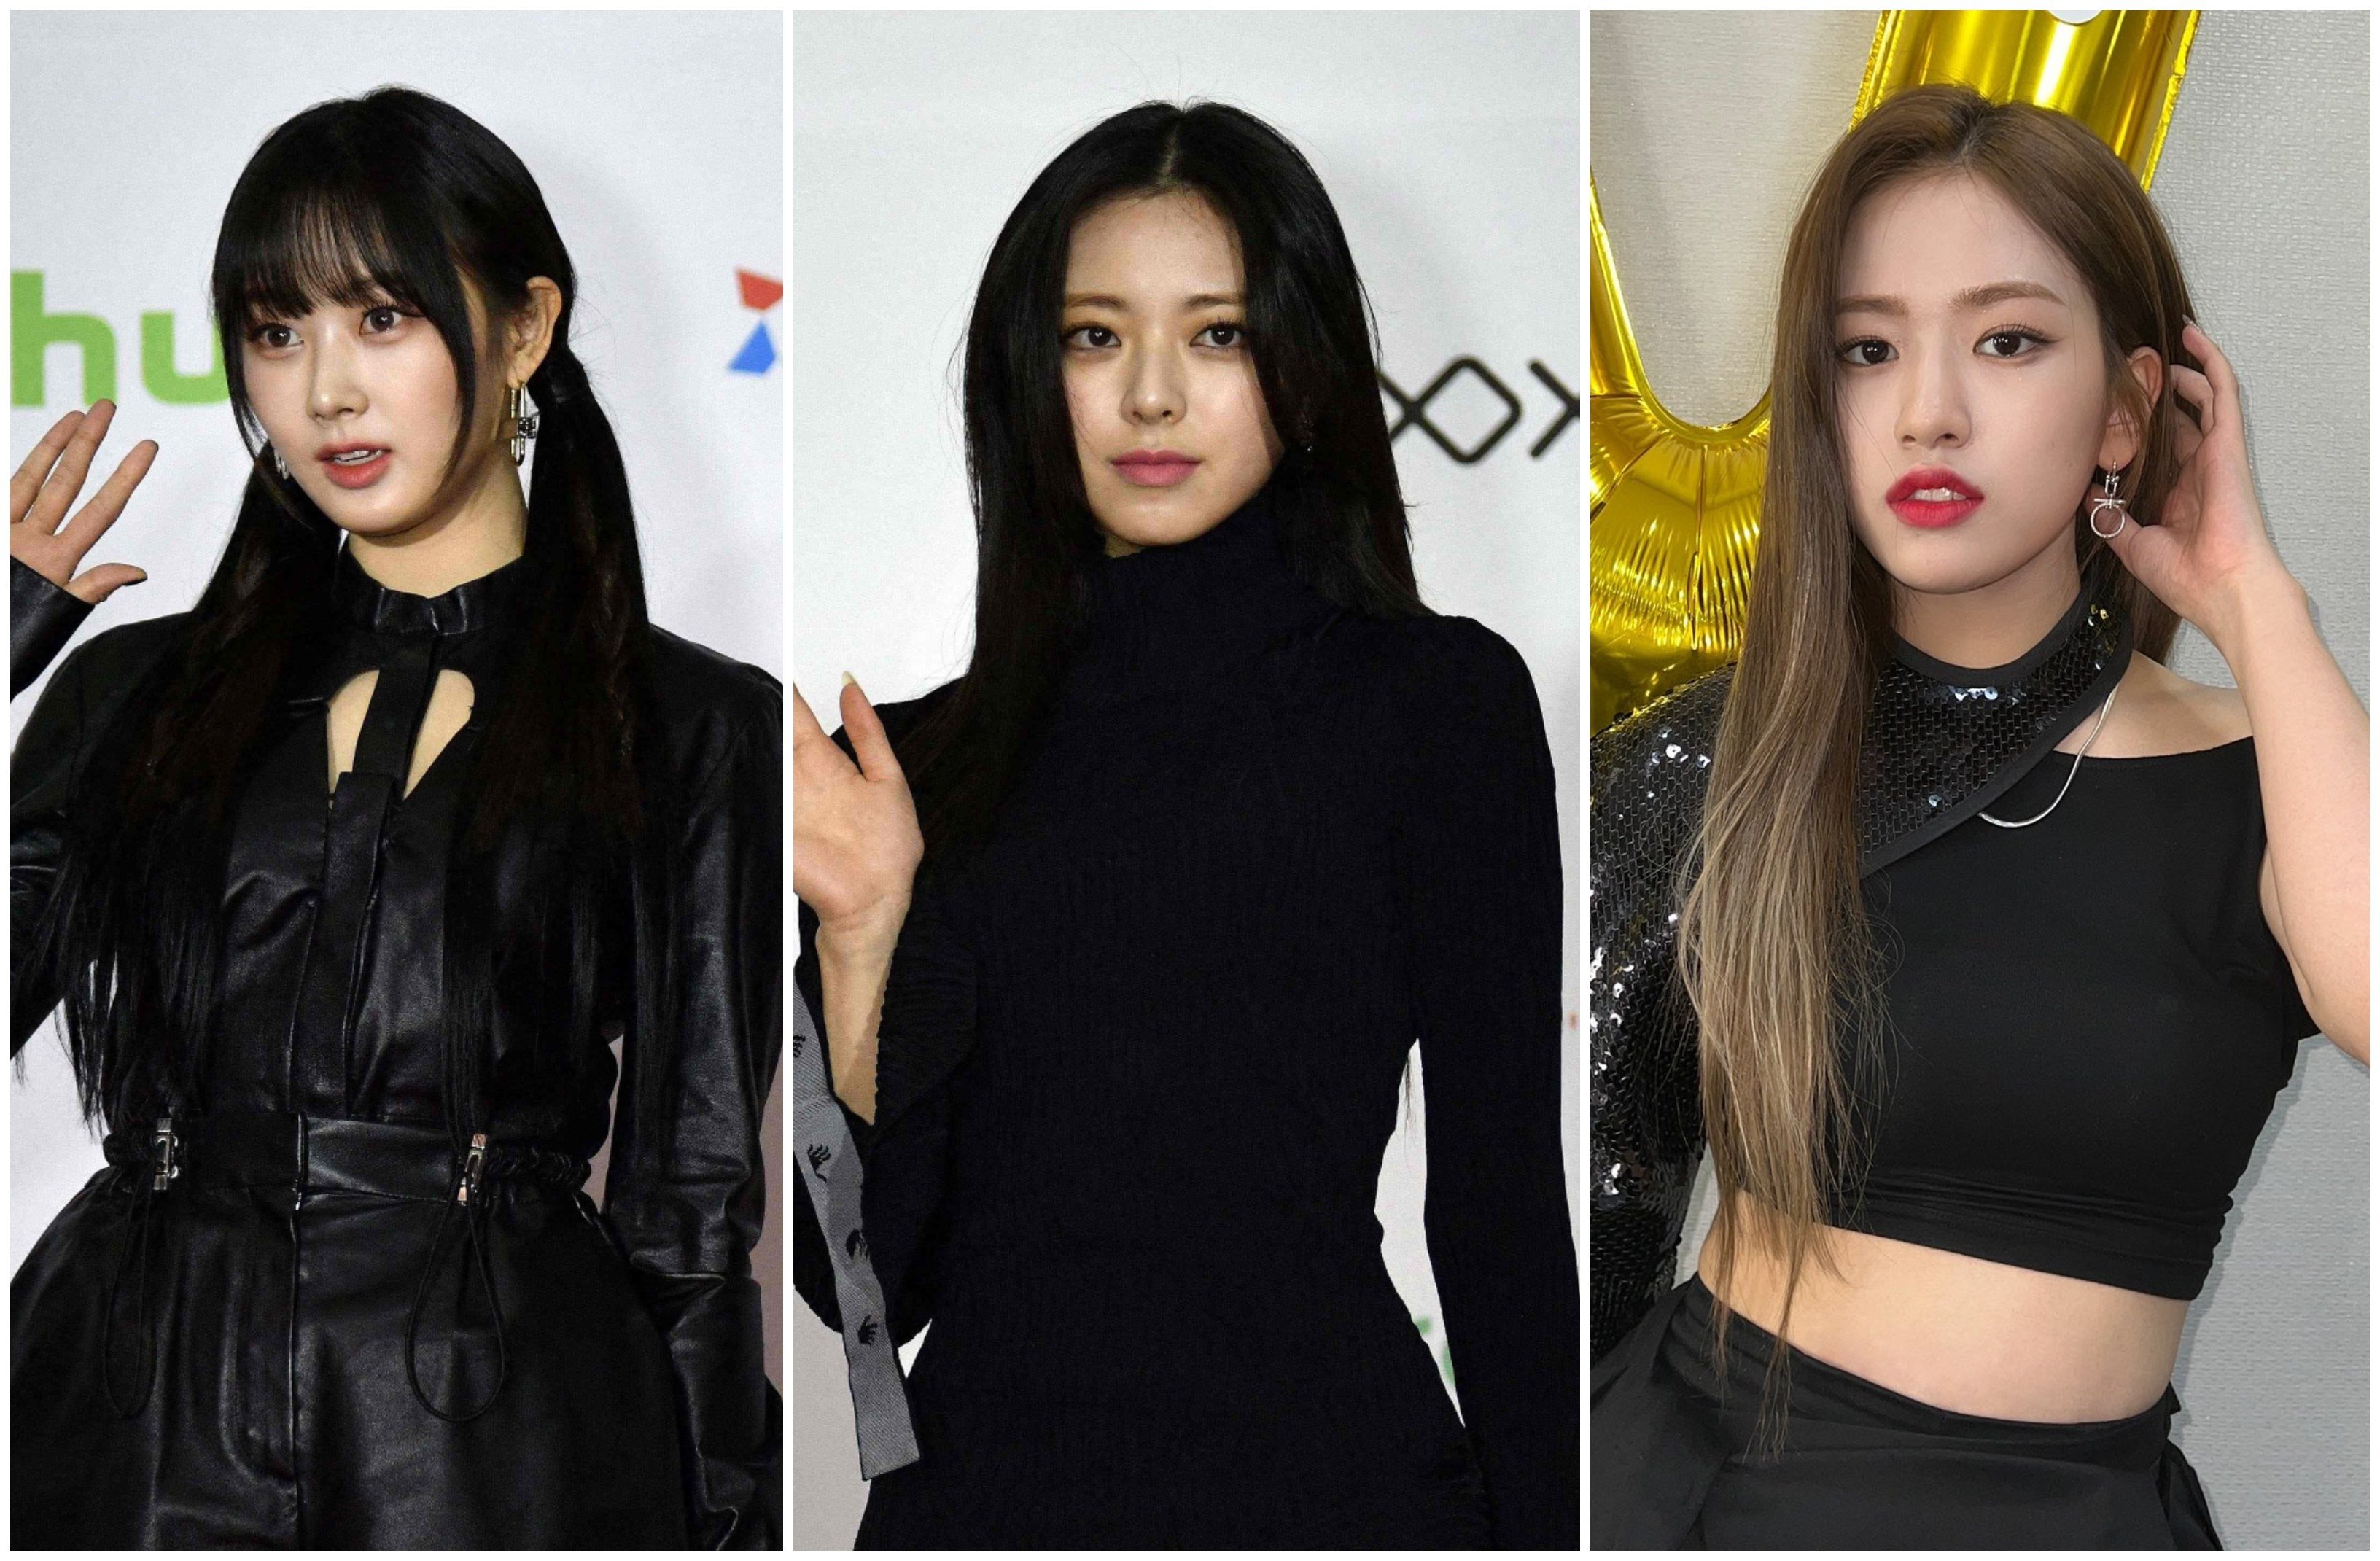 From Aespa to Twice, these K-pop stars faced backlash for their outfit choices. Photos: AFP, Agence France-Presse, @IVE_twt/Twitter